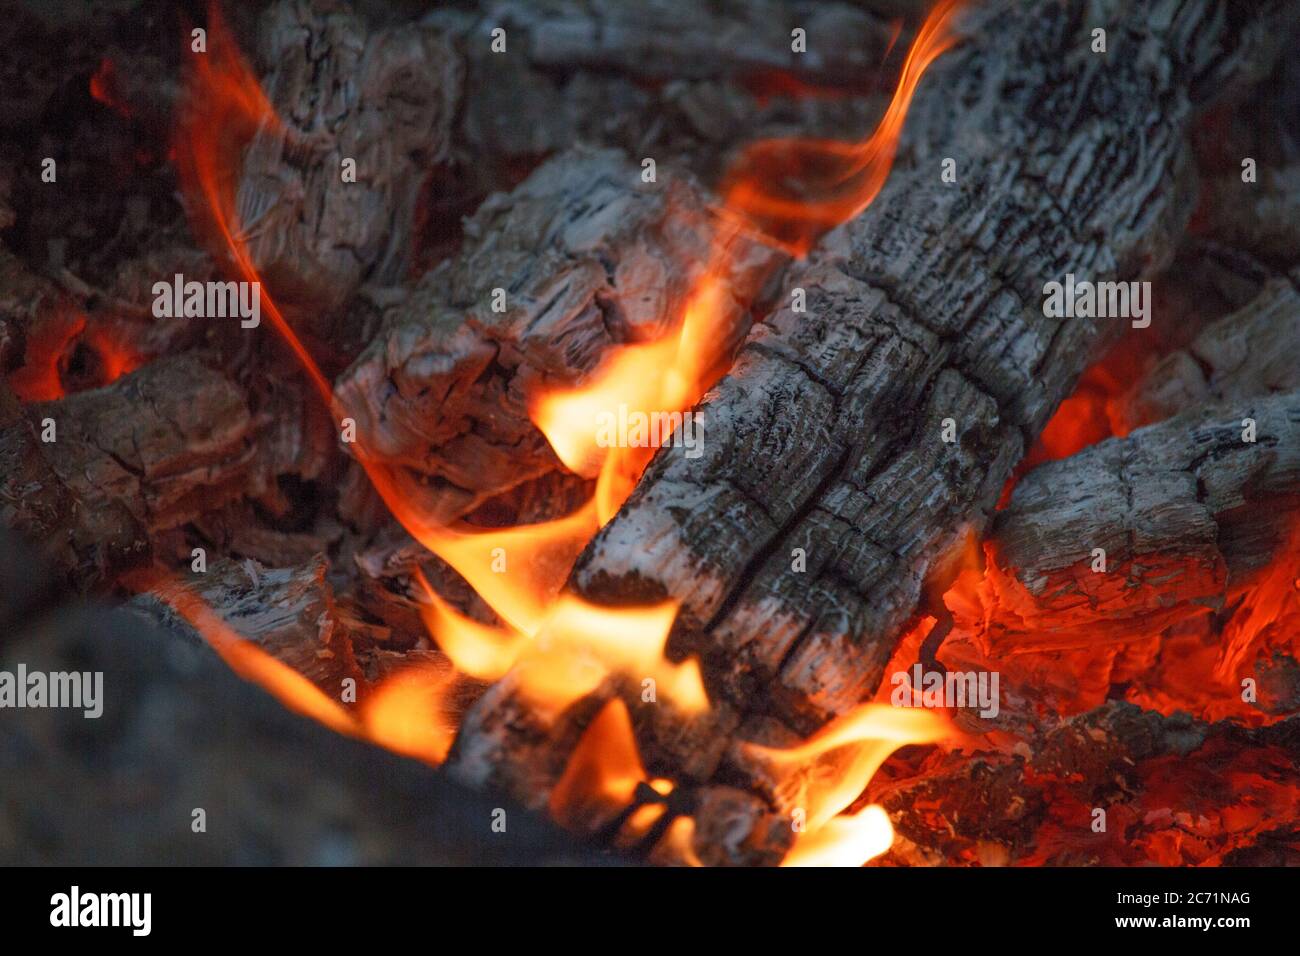 Fire wood, coal and amber ash closeup. Red tongues of flame and glowing amber. Concept of home and warmth. Close up shot of burning firewood in the Stock Photo